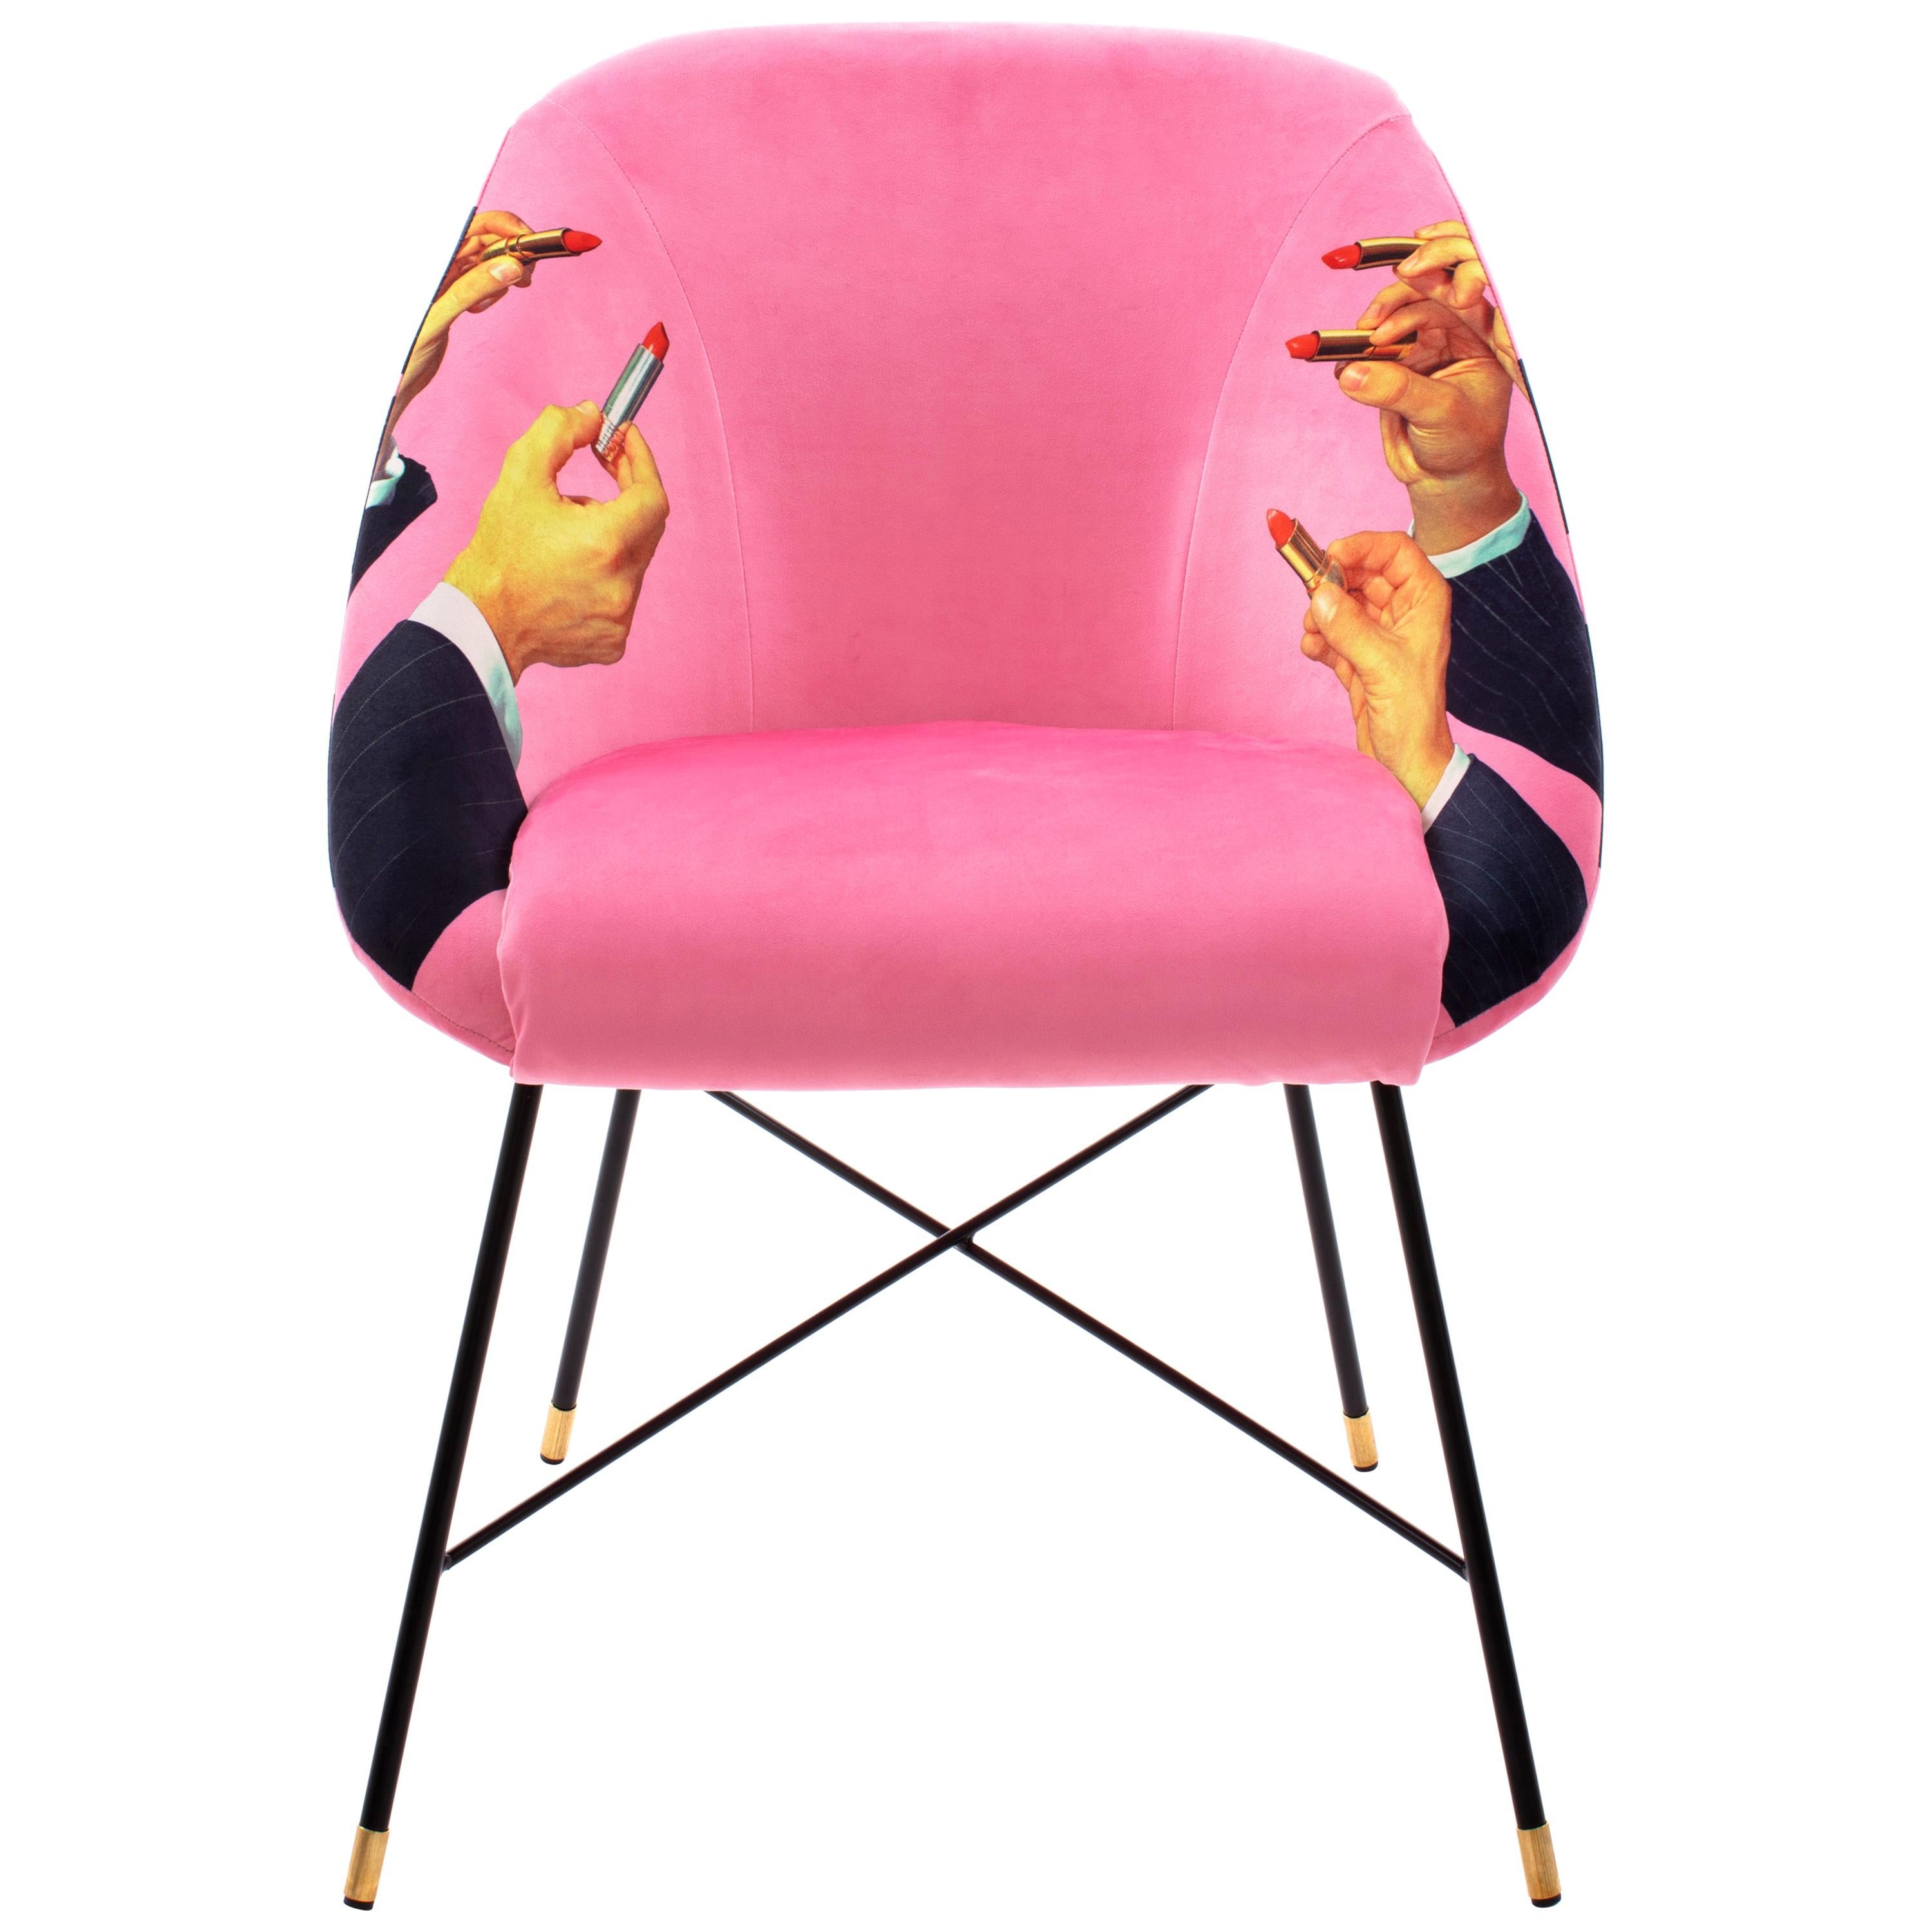 Seletti Pink "Lipsticks" Upholstered Occasional Chair by Toiletpaper For Sale